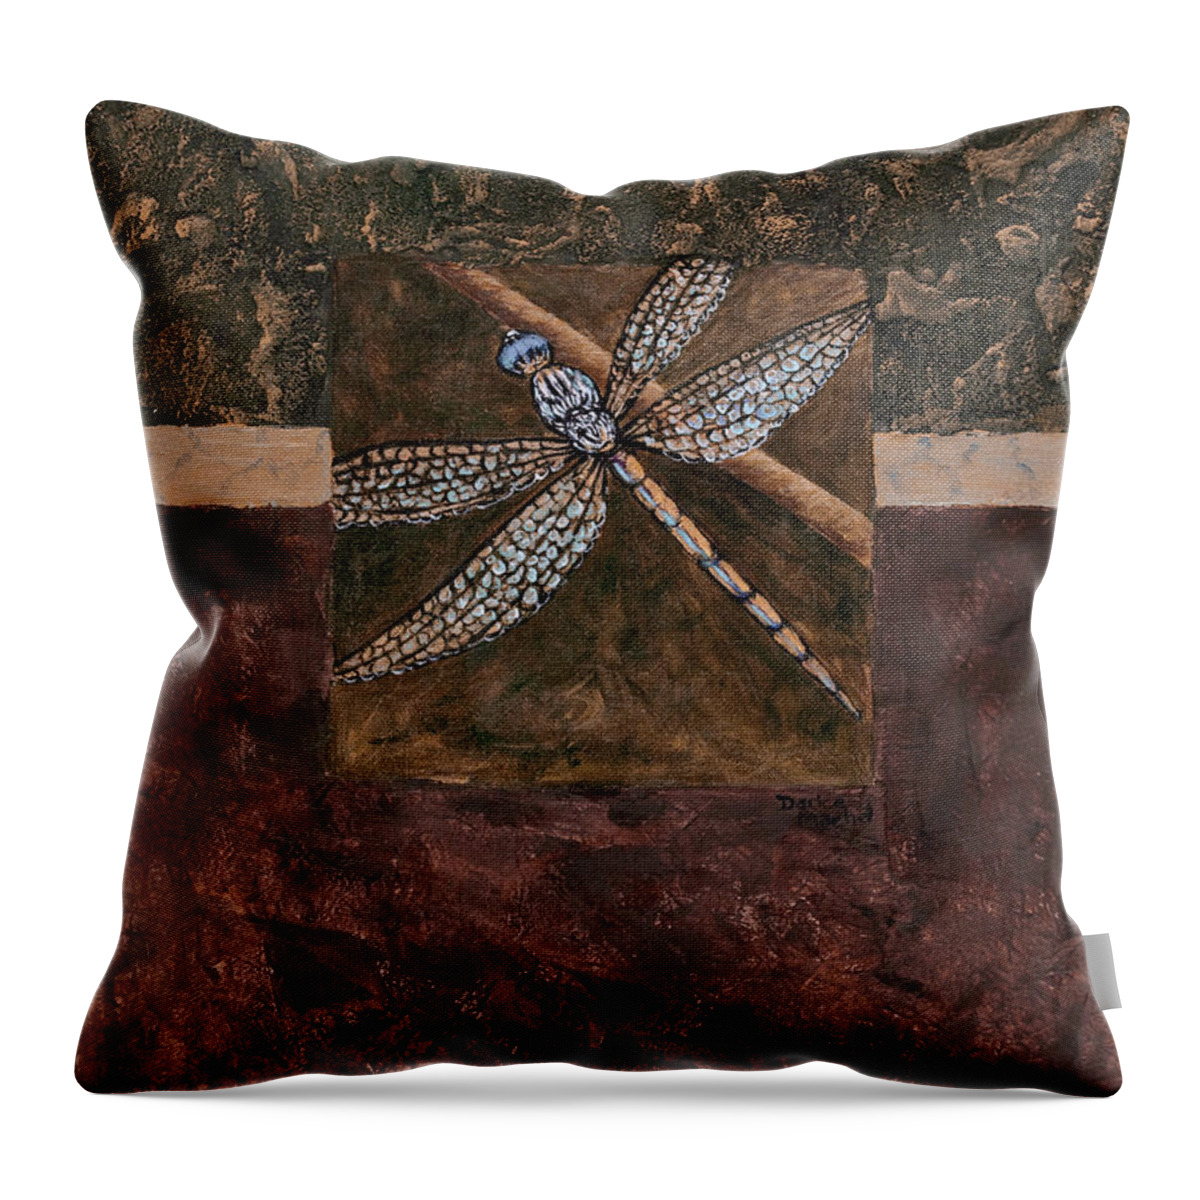 Dragonfly Throw Pillow featuring the painting Dragonfly by Darice Machel McGuire